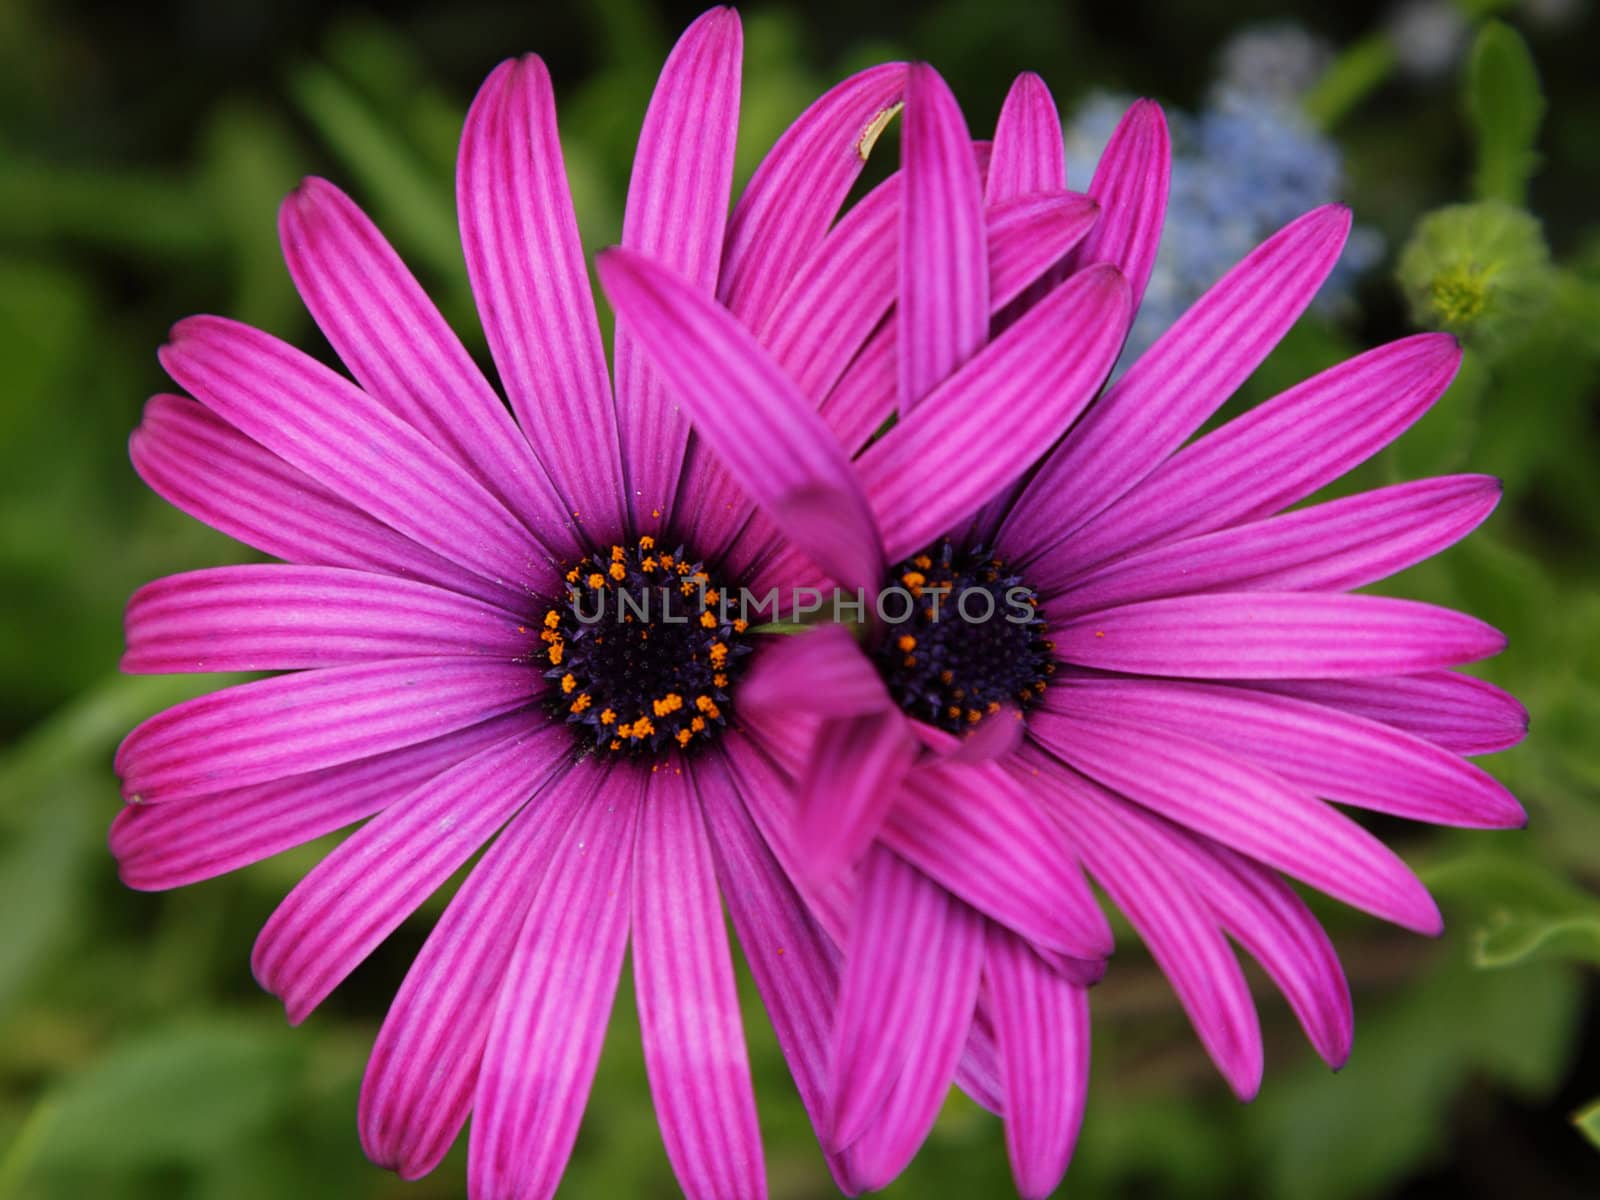 Two purple daisies grown togather in the garden